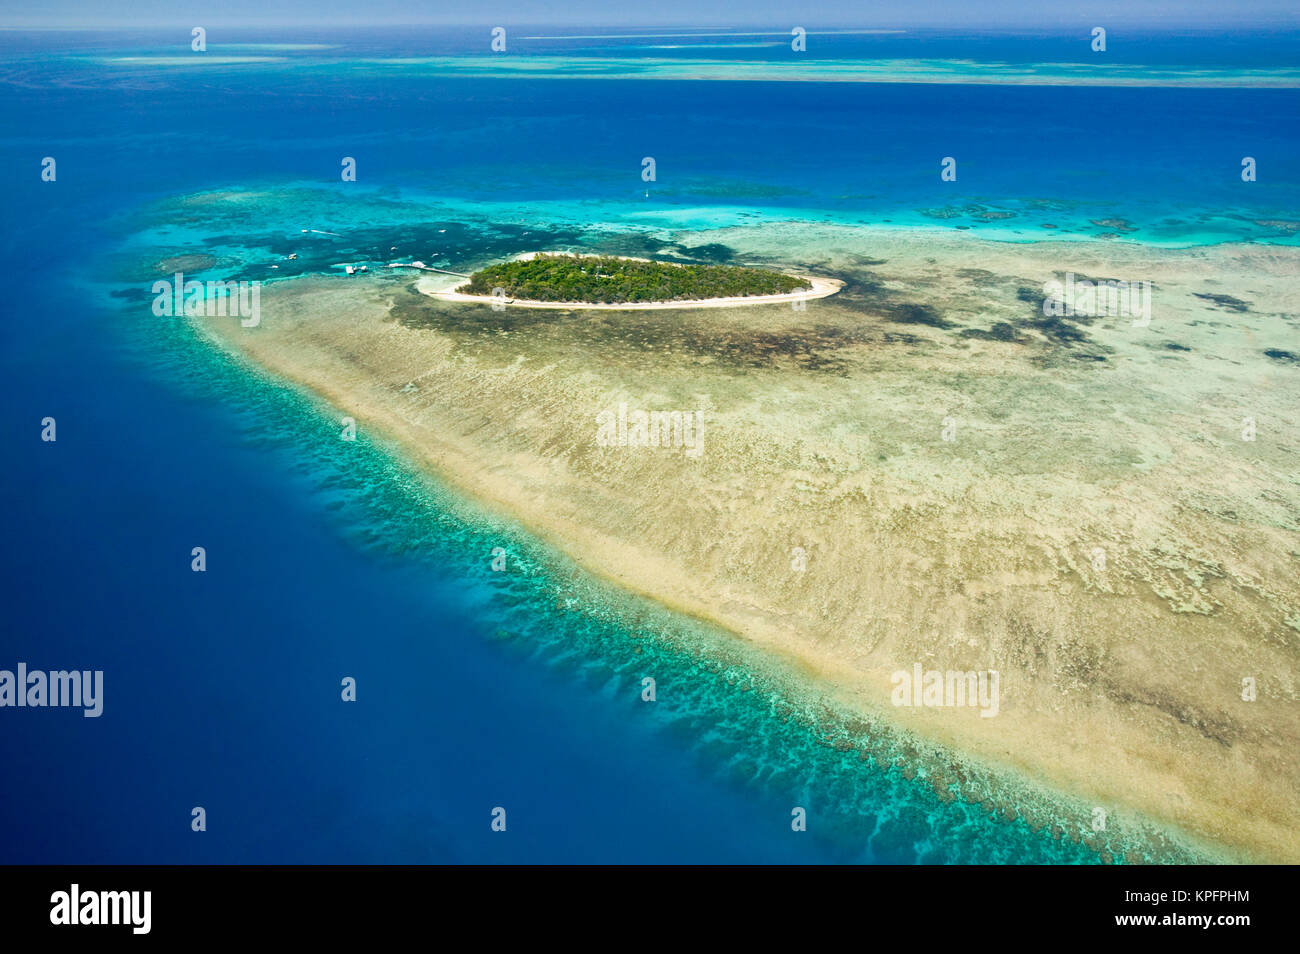 Australia, Queensland, North Coast, Cairns Area. The Great Barrier Reef- Aerial View of Green Island. Stock Photo